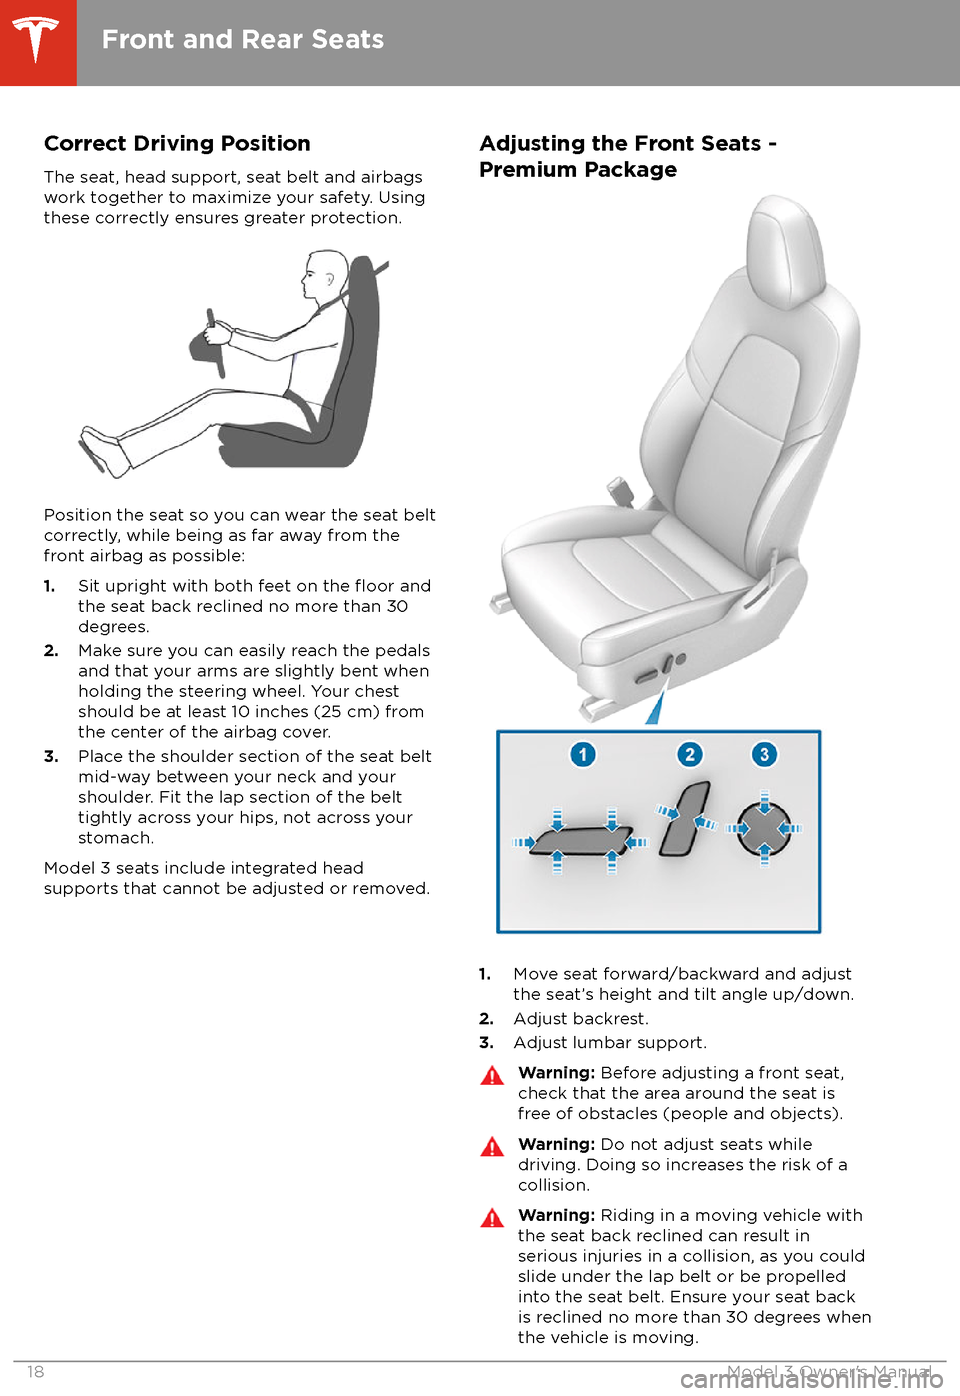 TESLA MODEL 3 2018 User Guide Correct Driving Position
The seat, head support, seat belt and airbags
work together to maximize your safety. Using
these correctly ensures greater protection.
Position the seat so you can wear the se